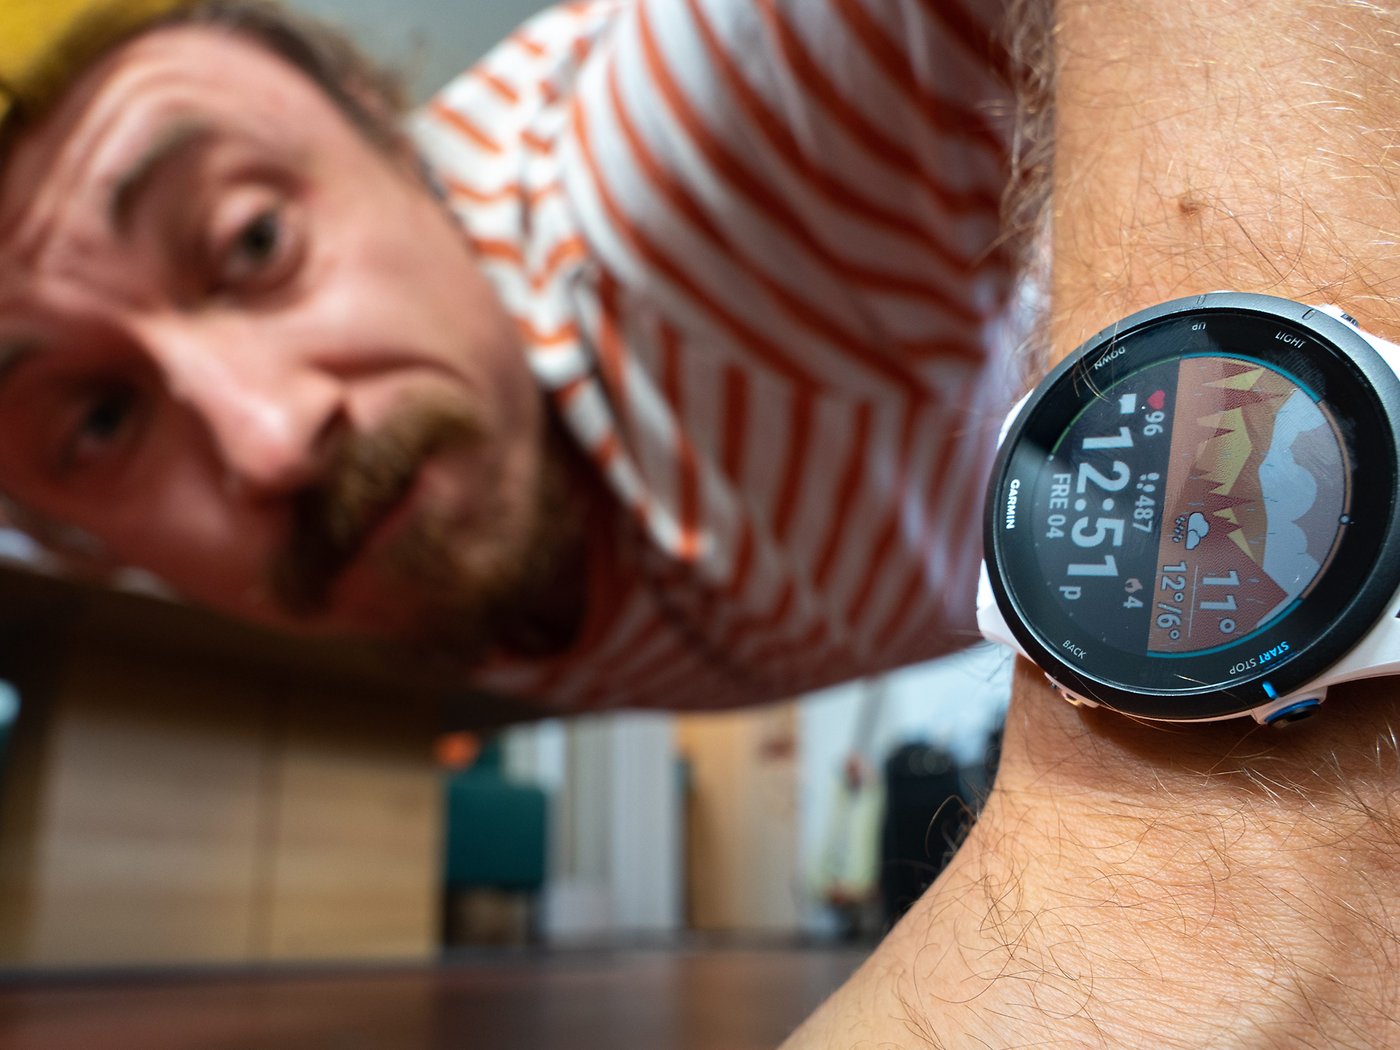 Garmin Forerunner 255 In-Depth Review: 13 New Things to Know! 